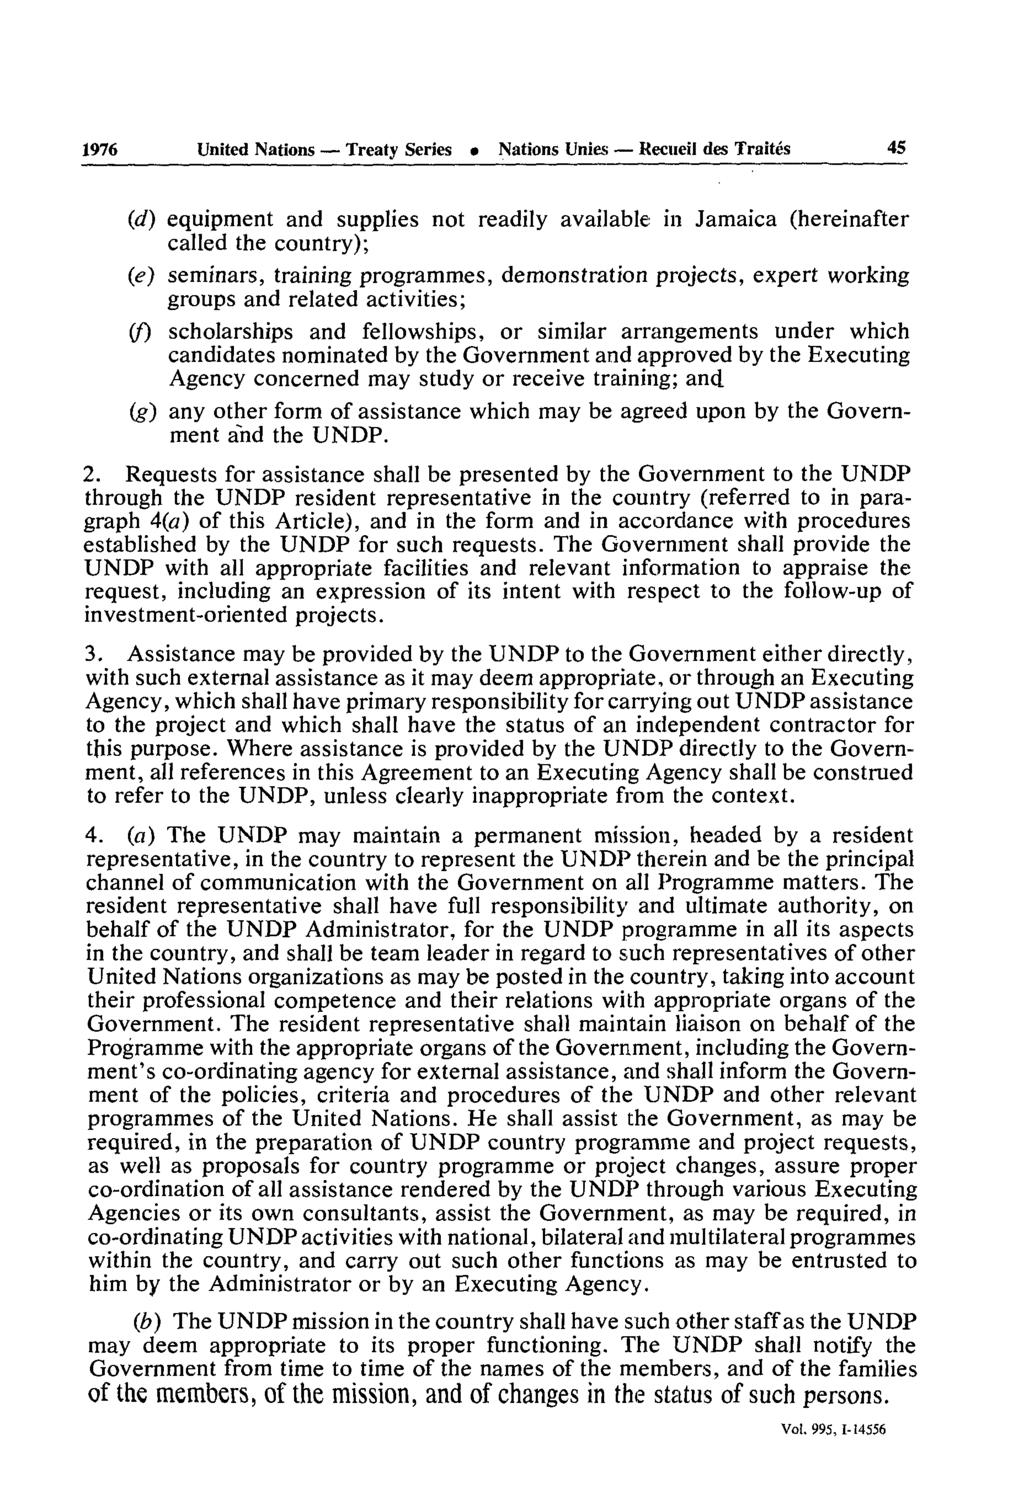 1976 United Nations Treaty Series Nations Unies Recueil des Traités 45 (ci) equipment and supplies not readily available in Jamaica (hereinafter called the country); (e) seminars, training